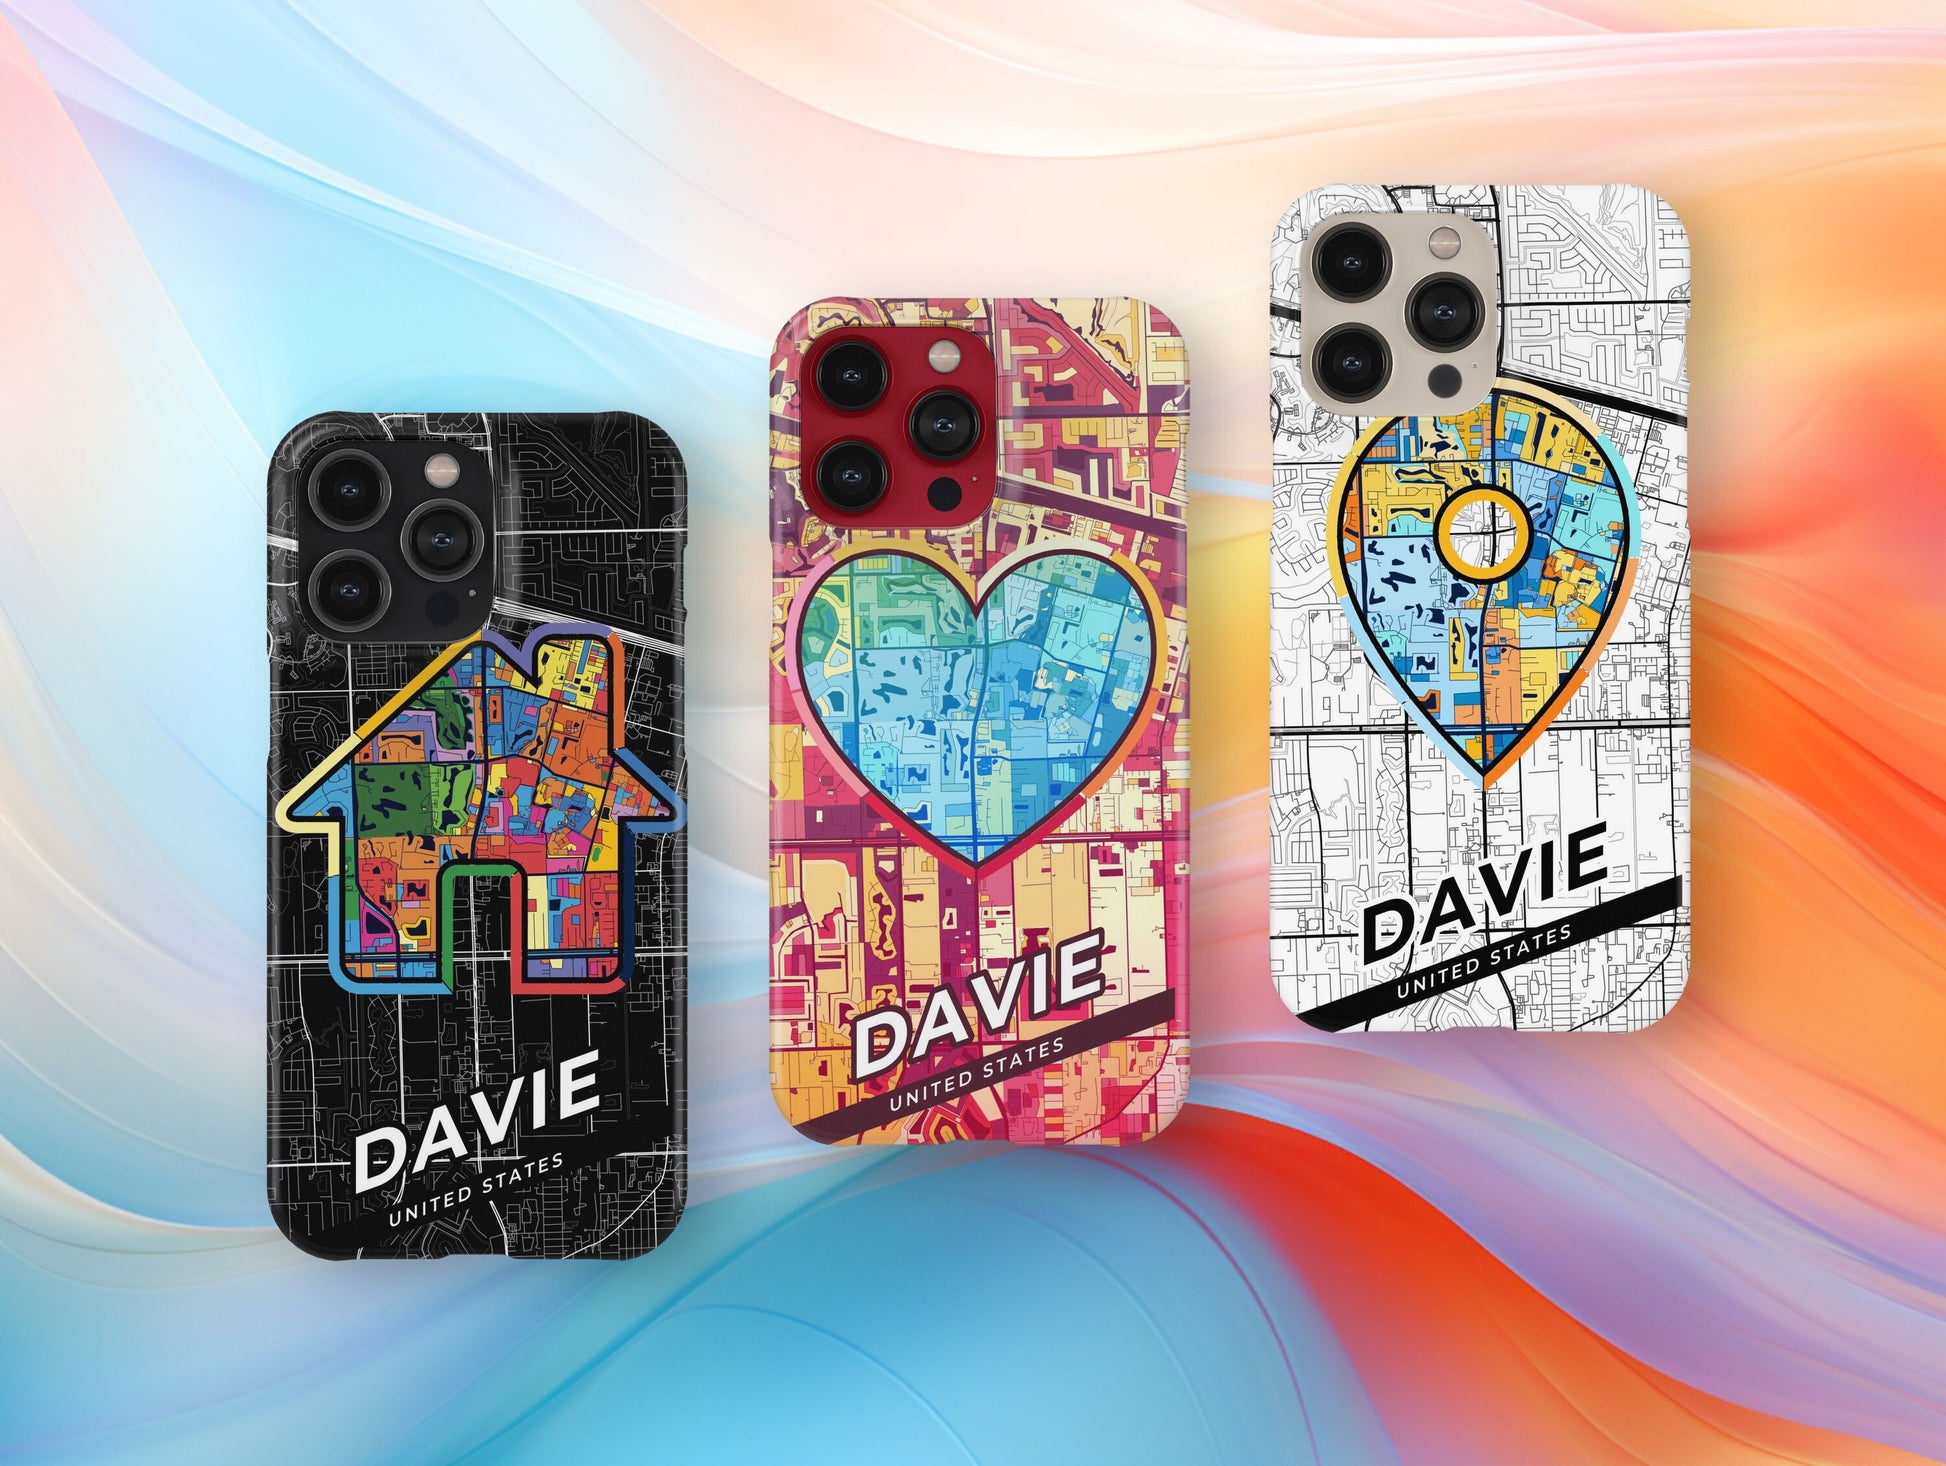 Davie Florida slim phone case with colorful icon. Birthday, wedding or housewarming gift. Couple match cases.